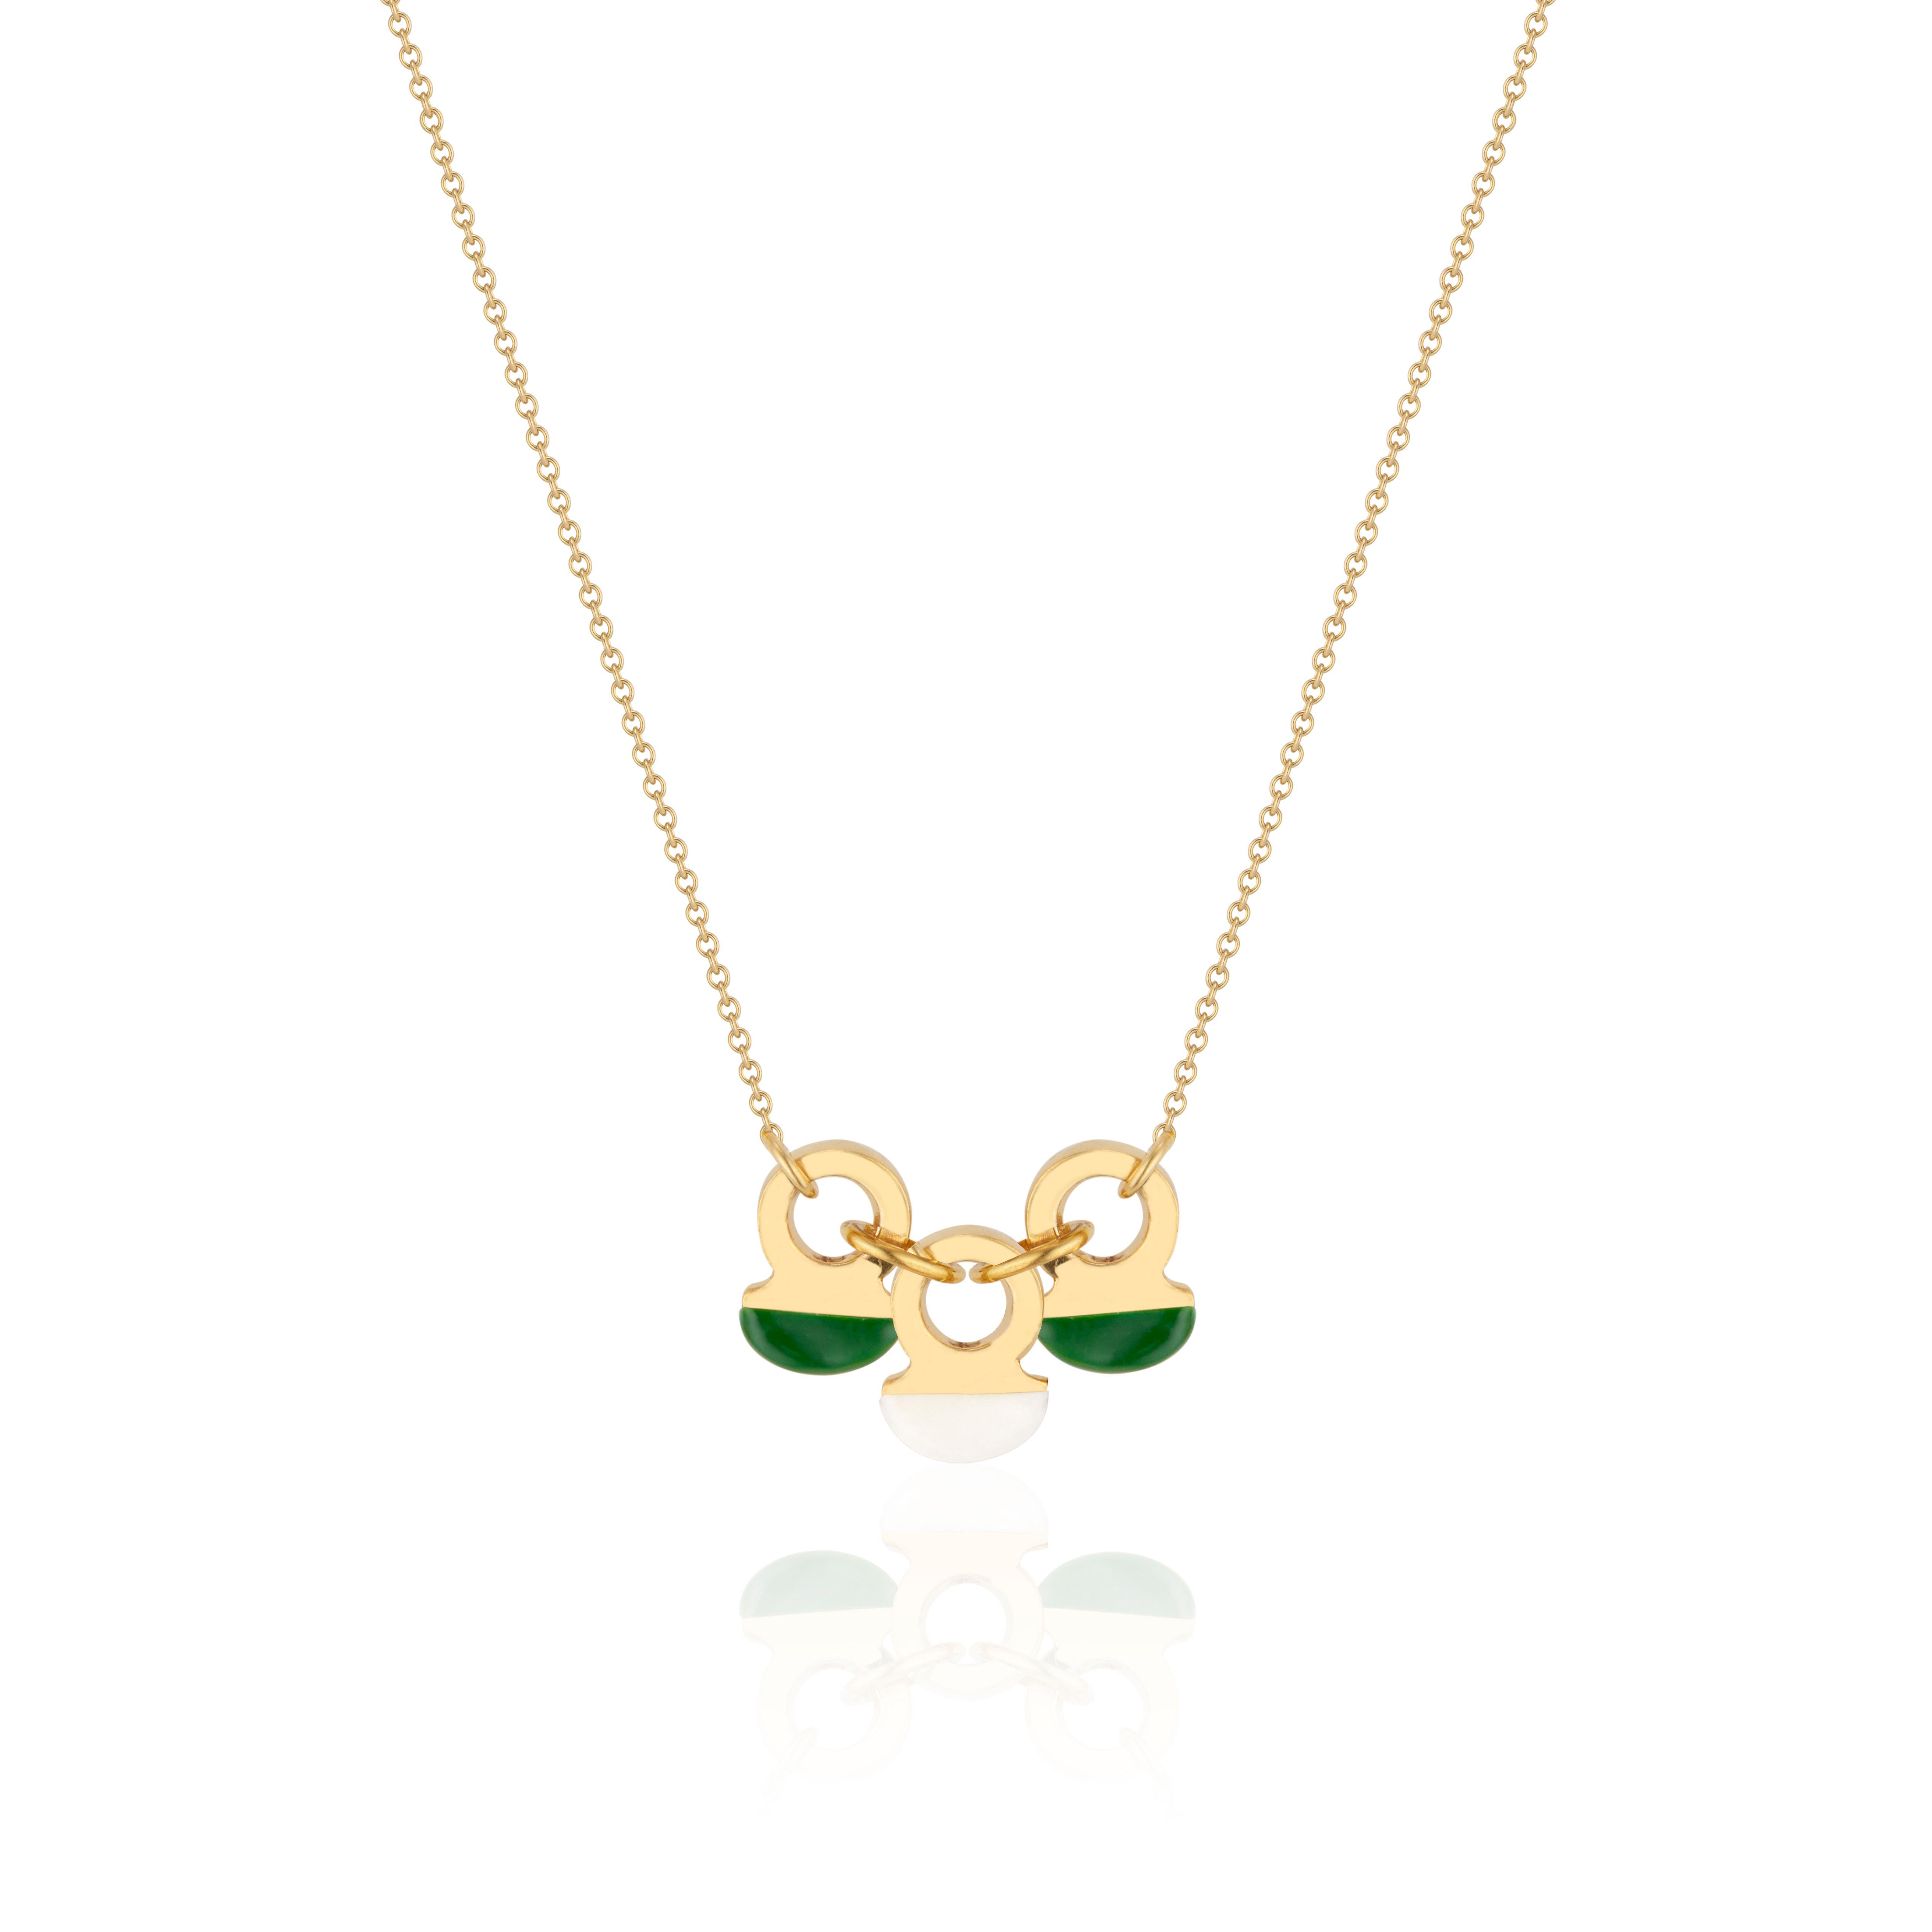 Artisan 22K Gold Vermeil Talisman Trio Choker with Enamel Accents by Chee Lee New York For Sale